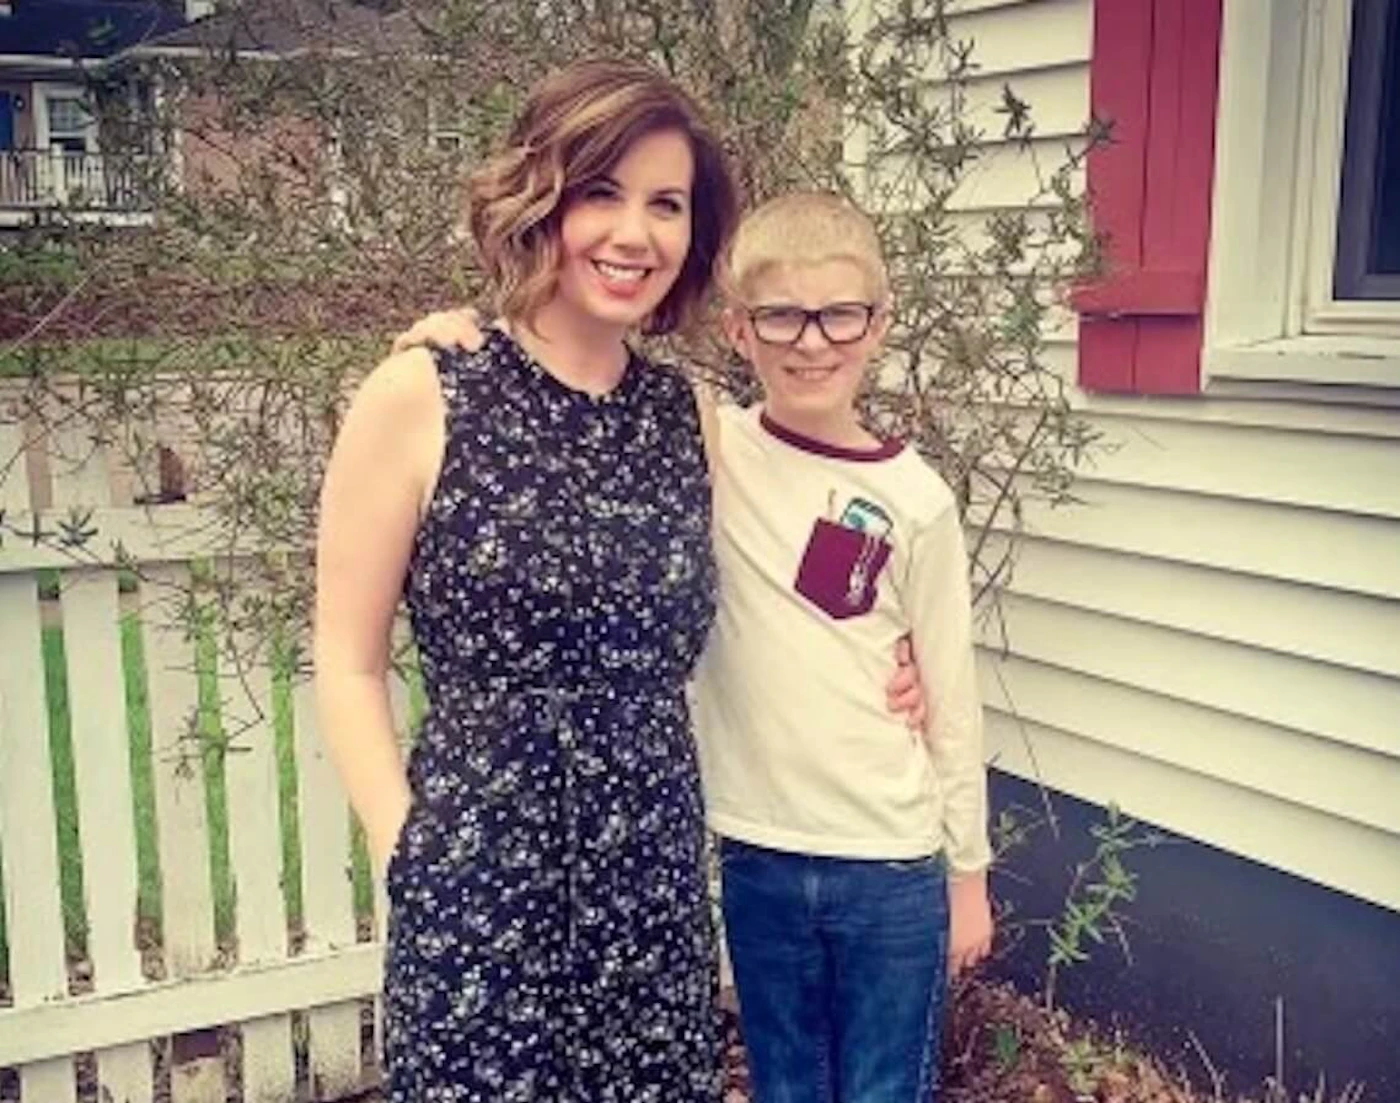 Danielle Ralston said she is constantly nervous that her 10-year-old son Graham will contract COVID-19 and experience extreme symptoms because he has a rare stomach illness that makes him more susceptible to the virus. (Photo courtesy of Danielle Ralston)